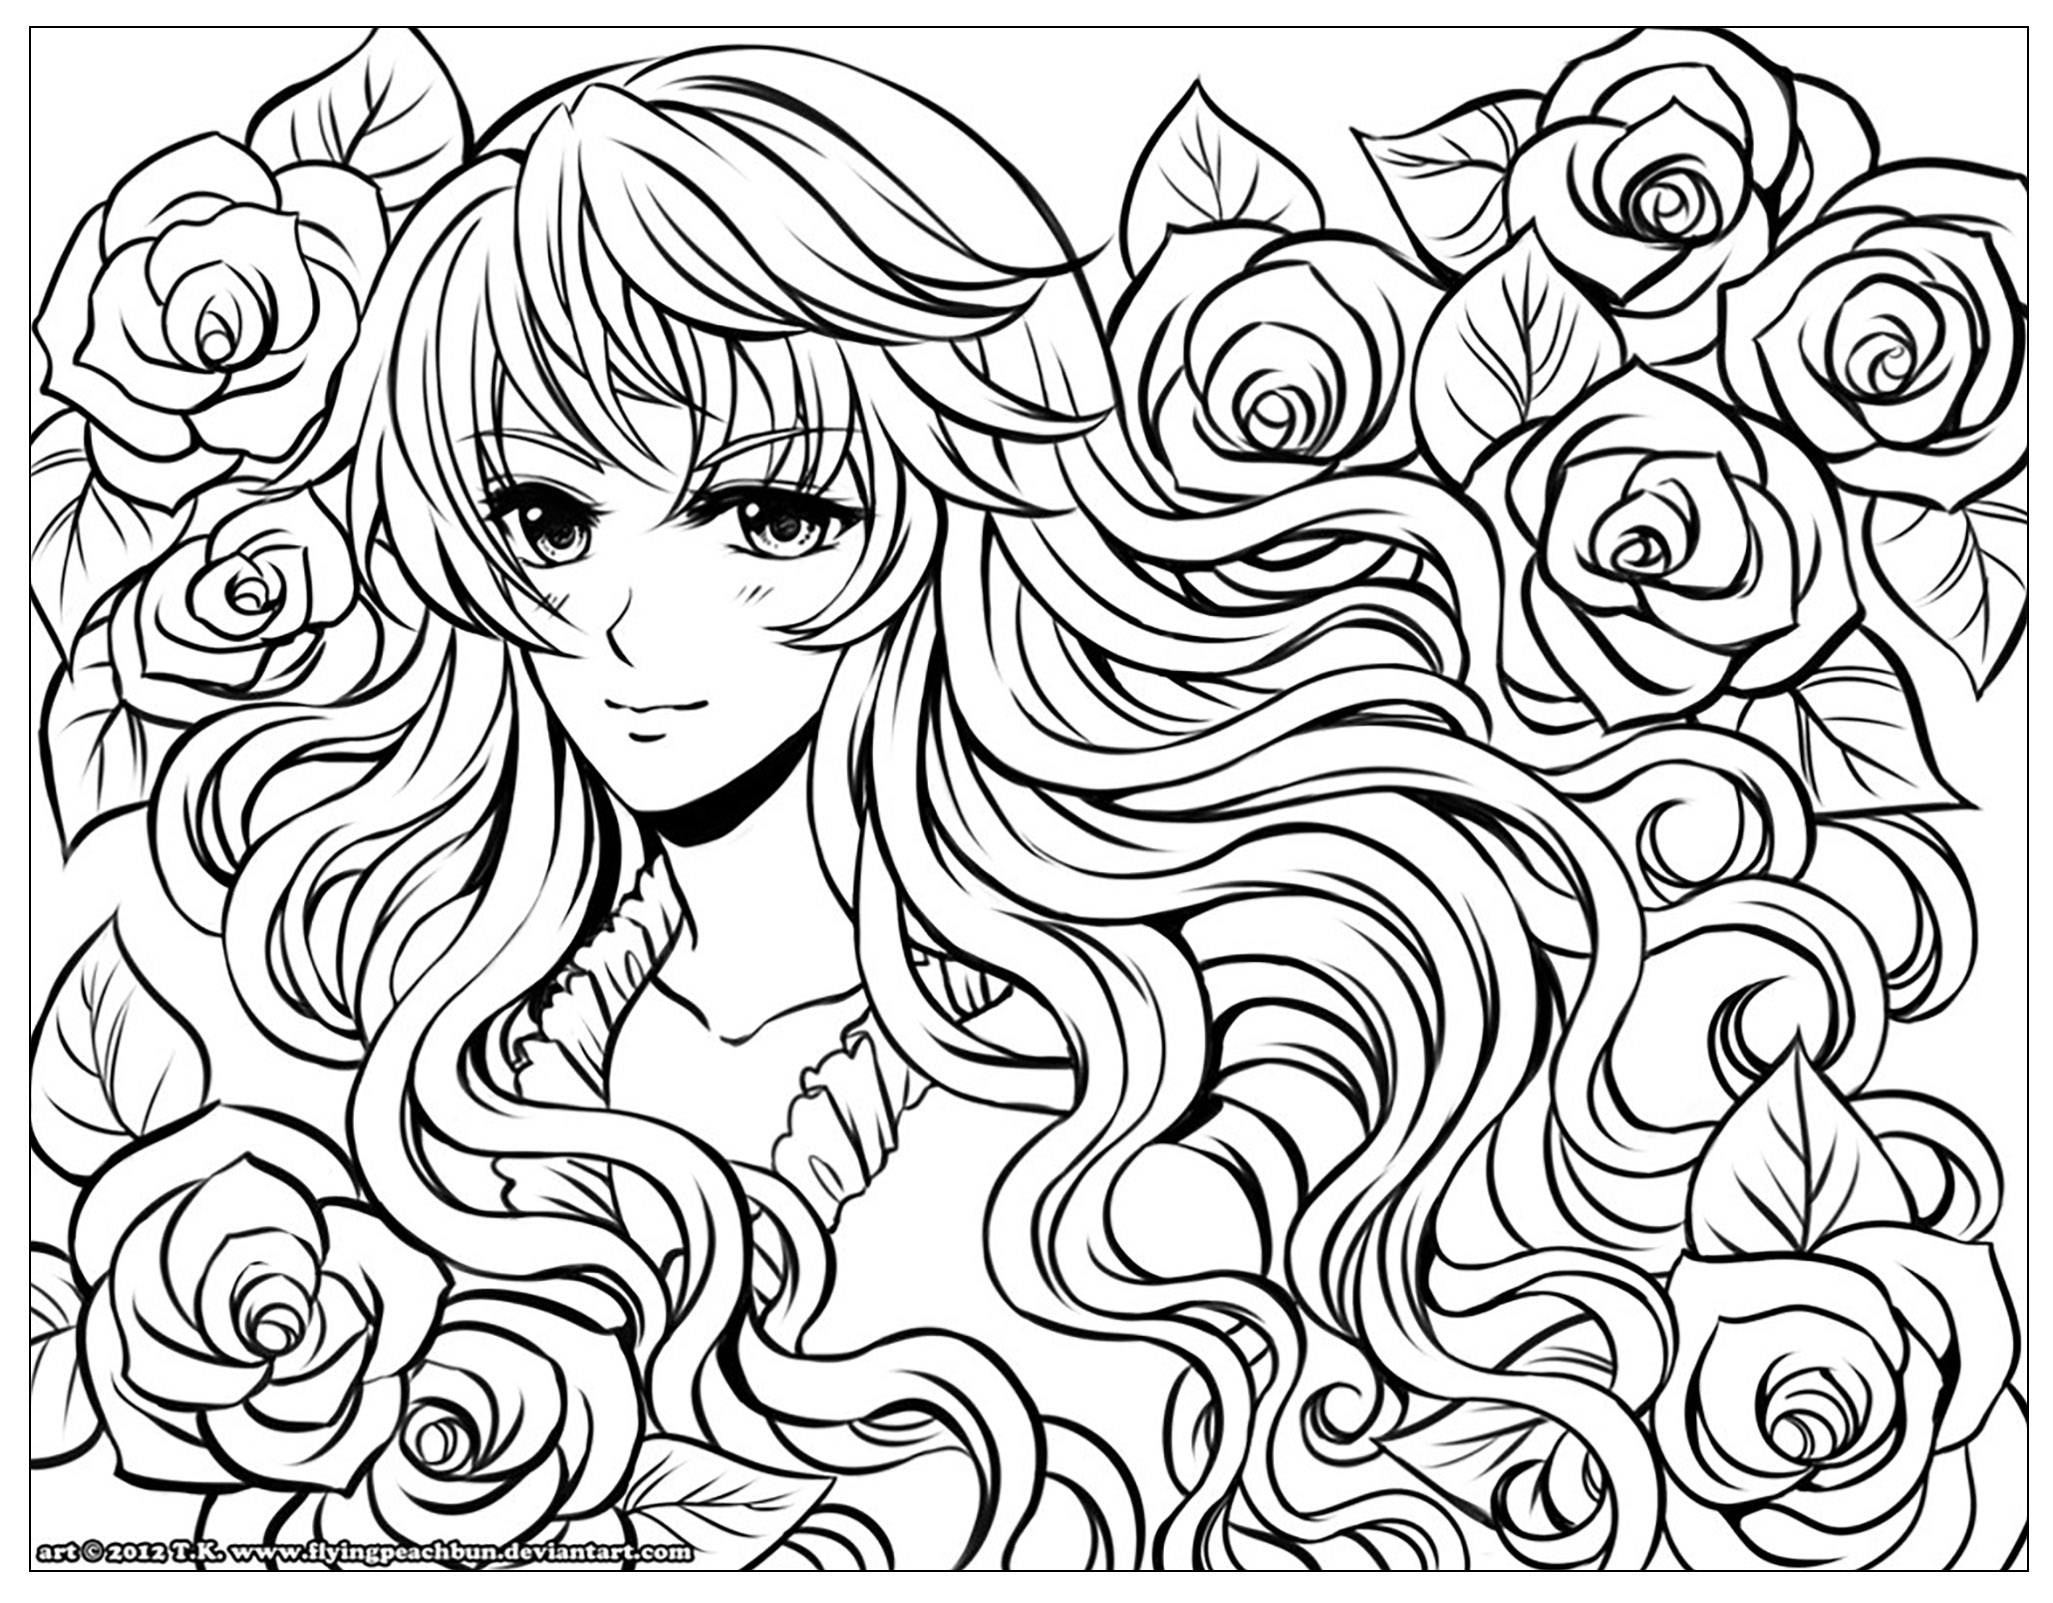 Anime Girls Coloring Pages - 100 Printable Coloring Pages